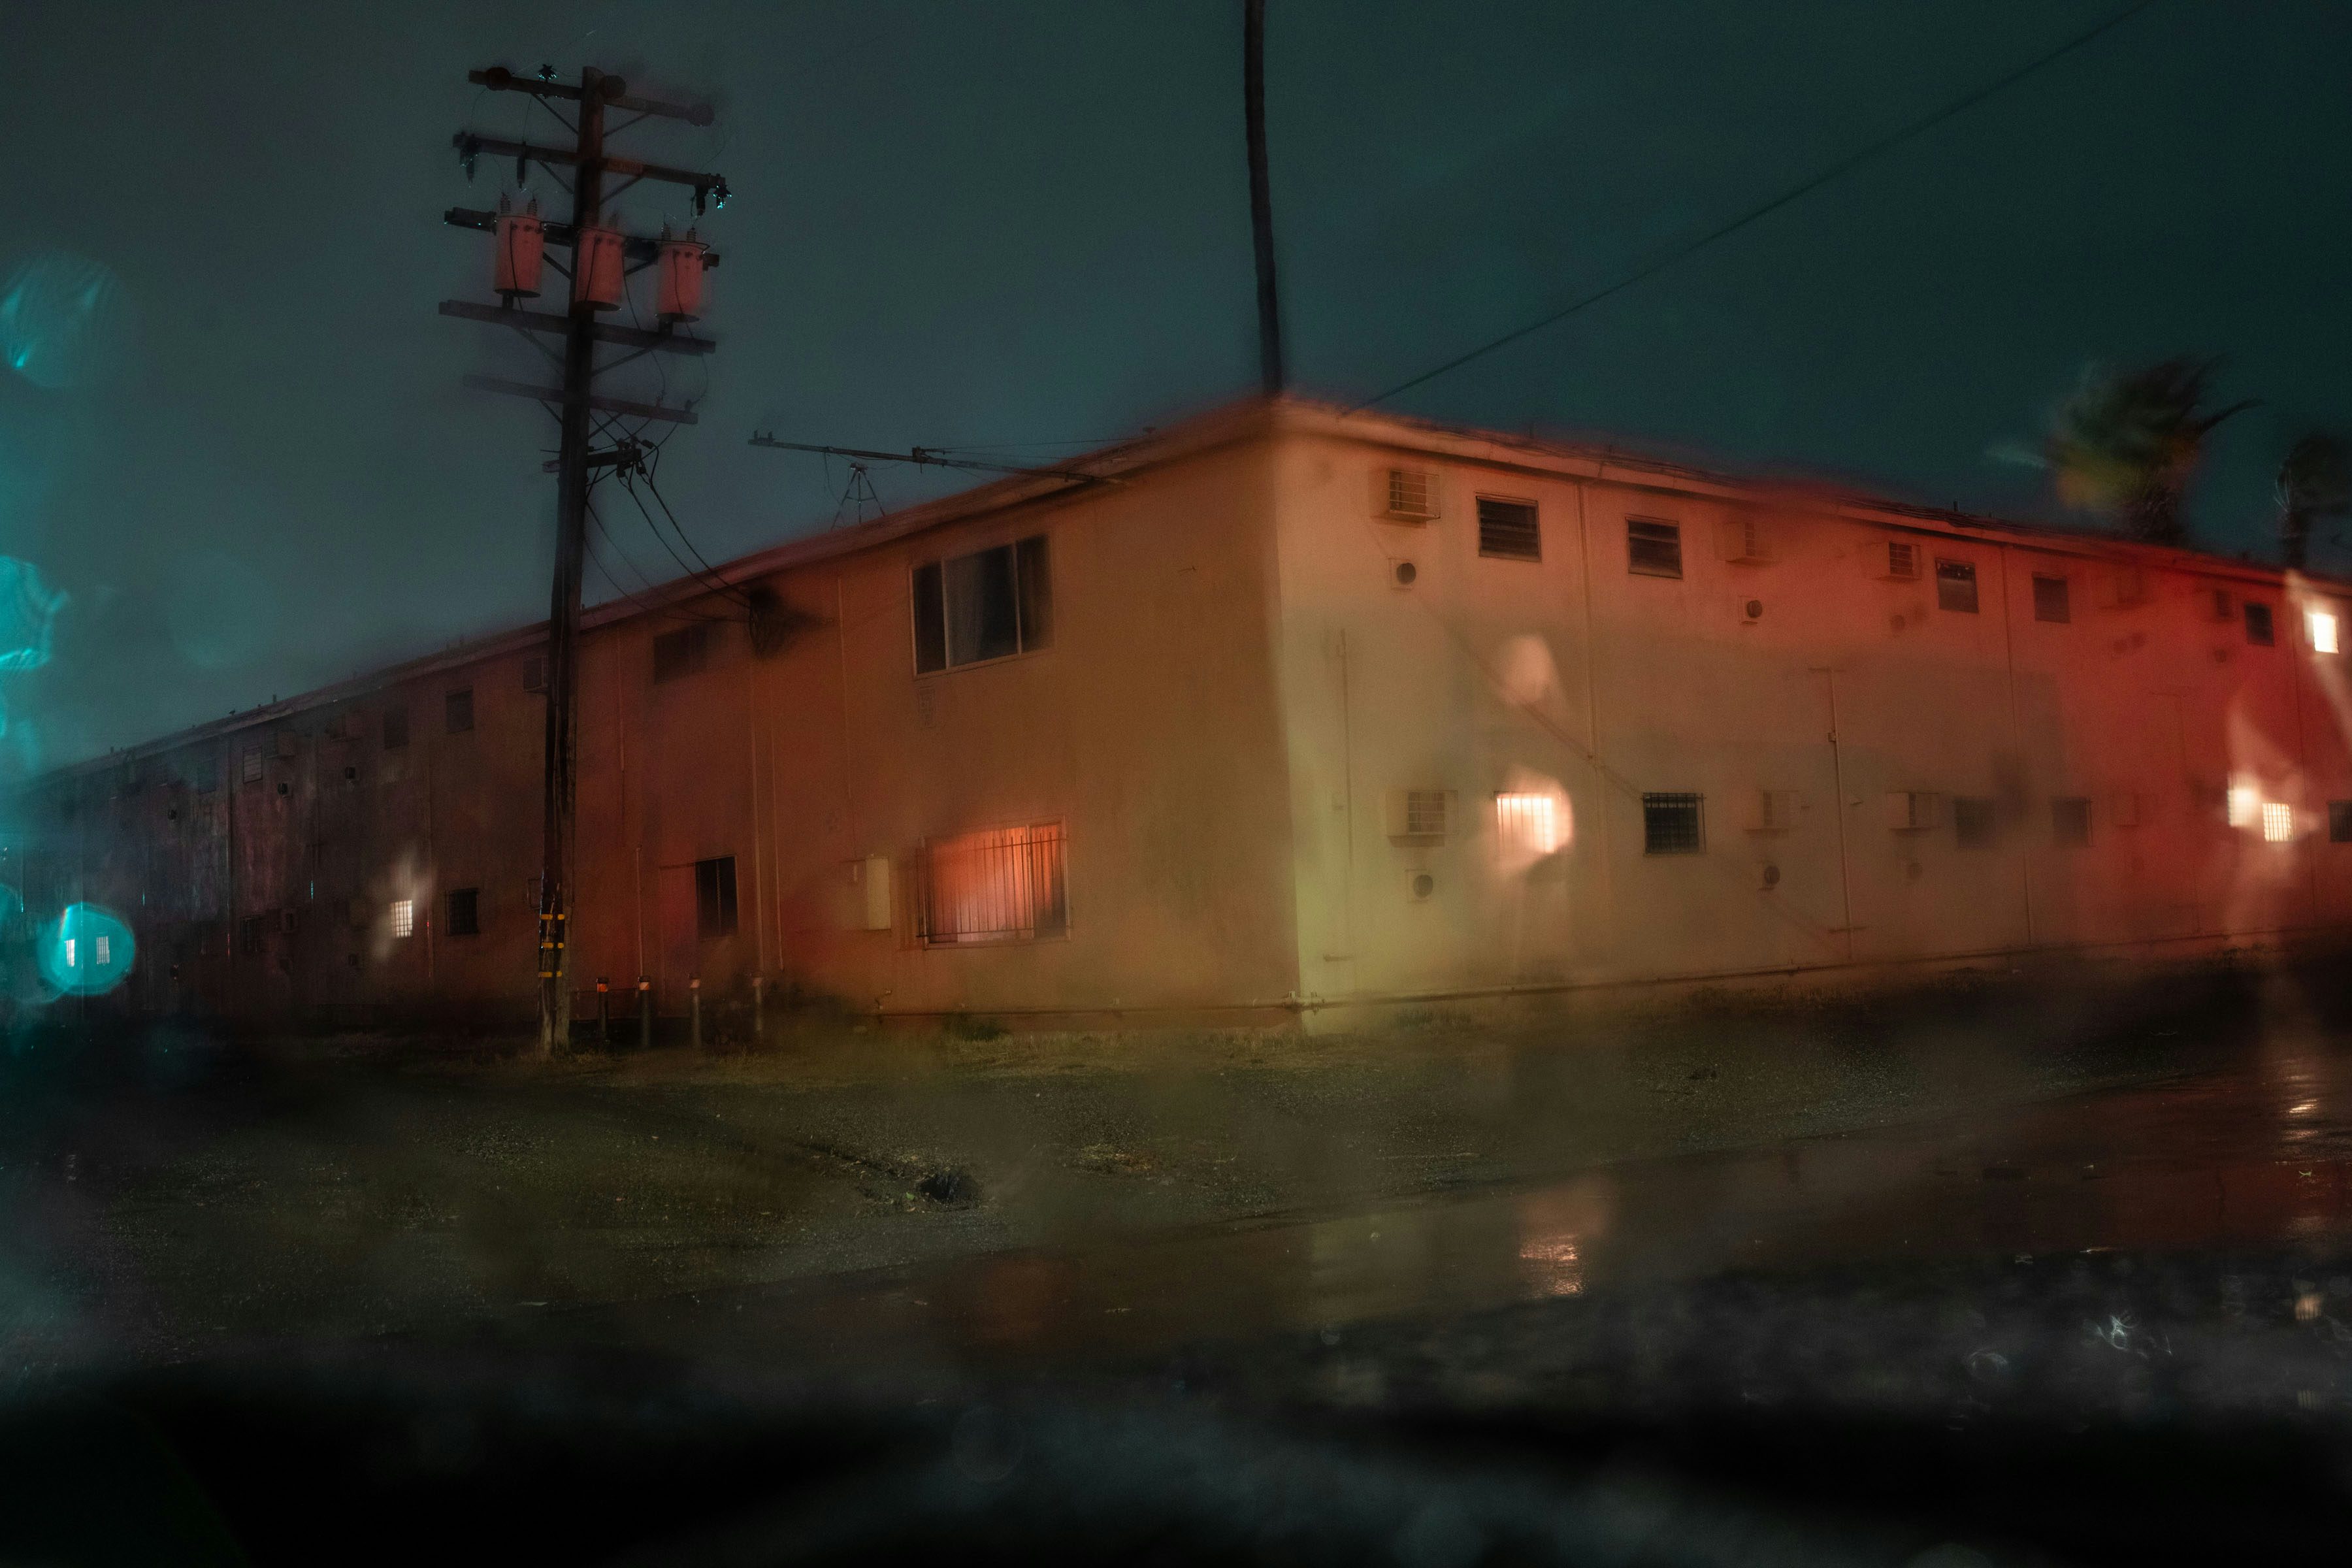 The Black Mechanism #16 by Todd Hido, Obscura Curated Commission.